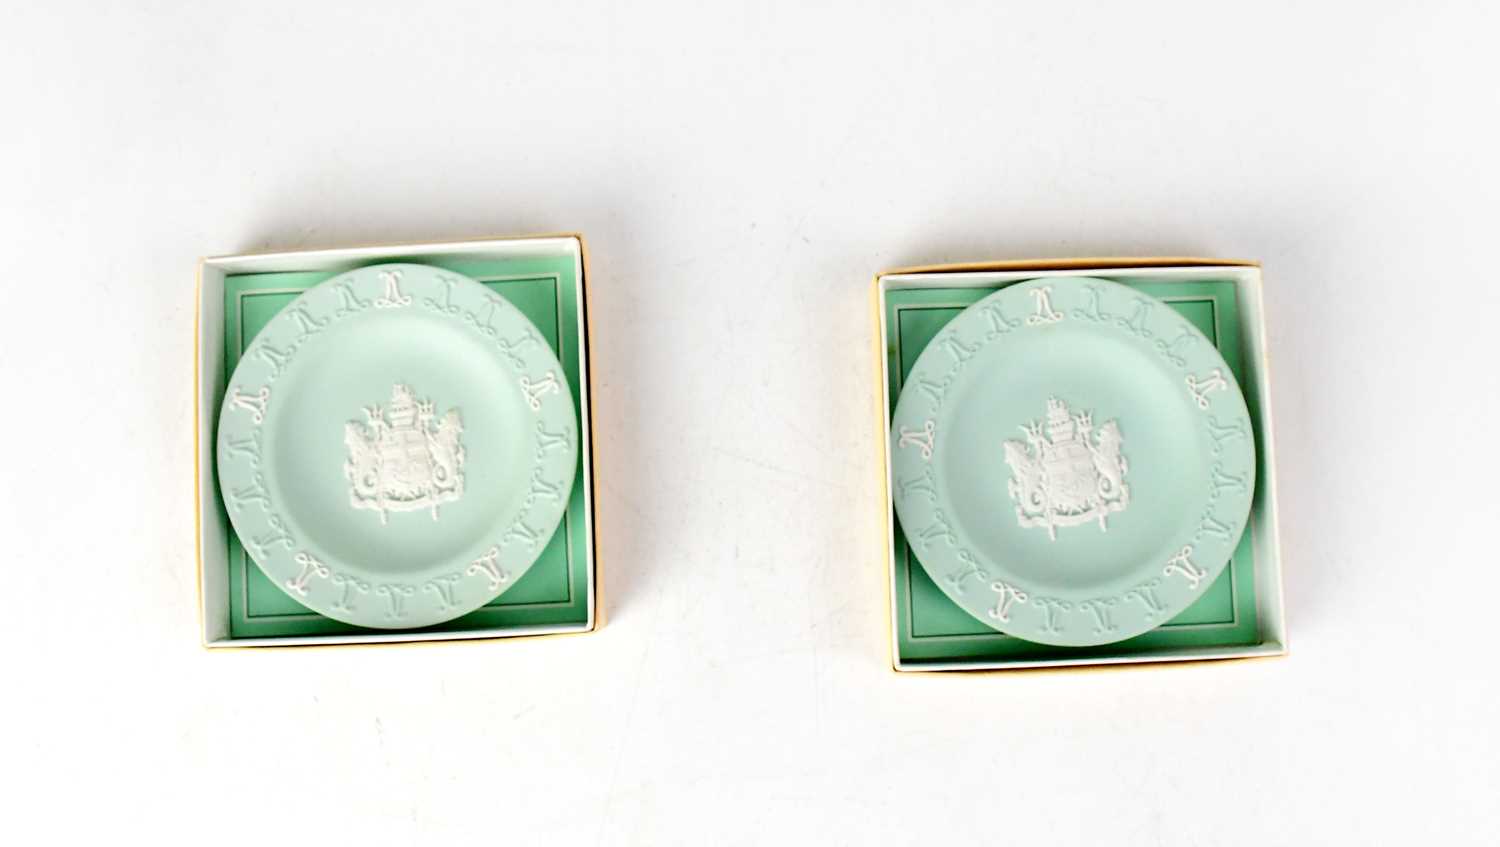 WEDGWOOD; a pair of limited edition commemorative Lloyds of London Centenary 1688-1988 dishes in